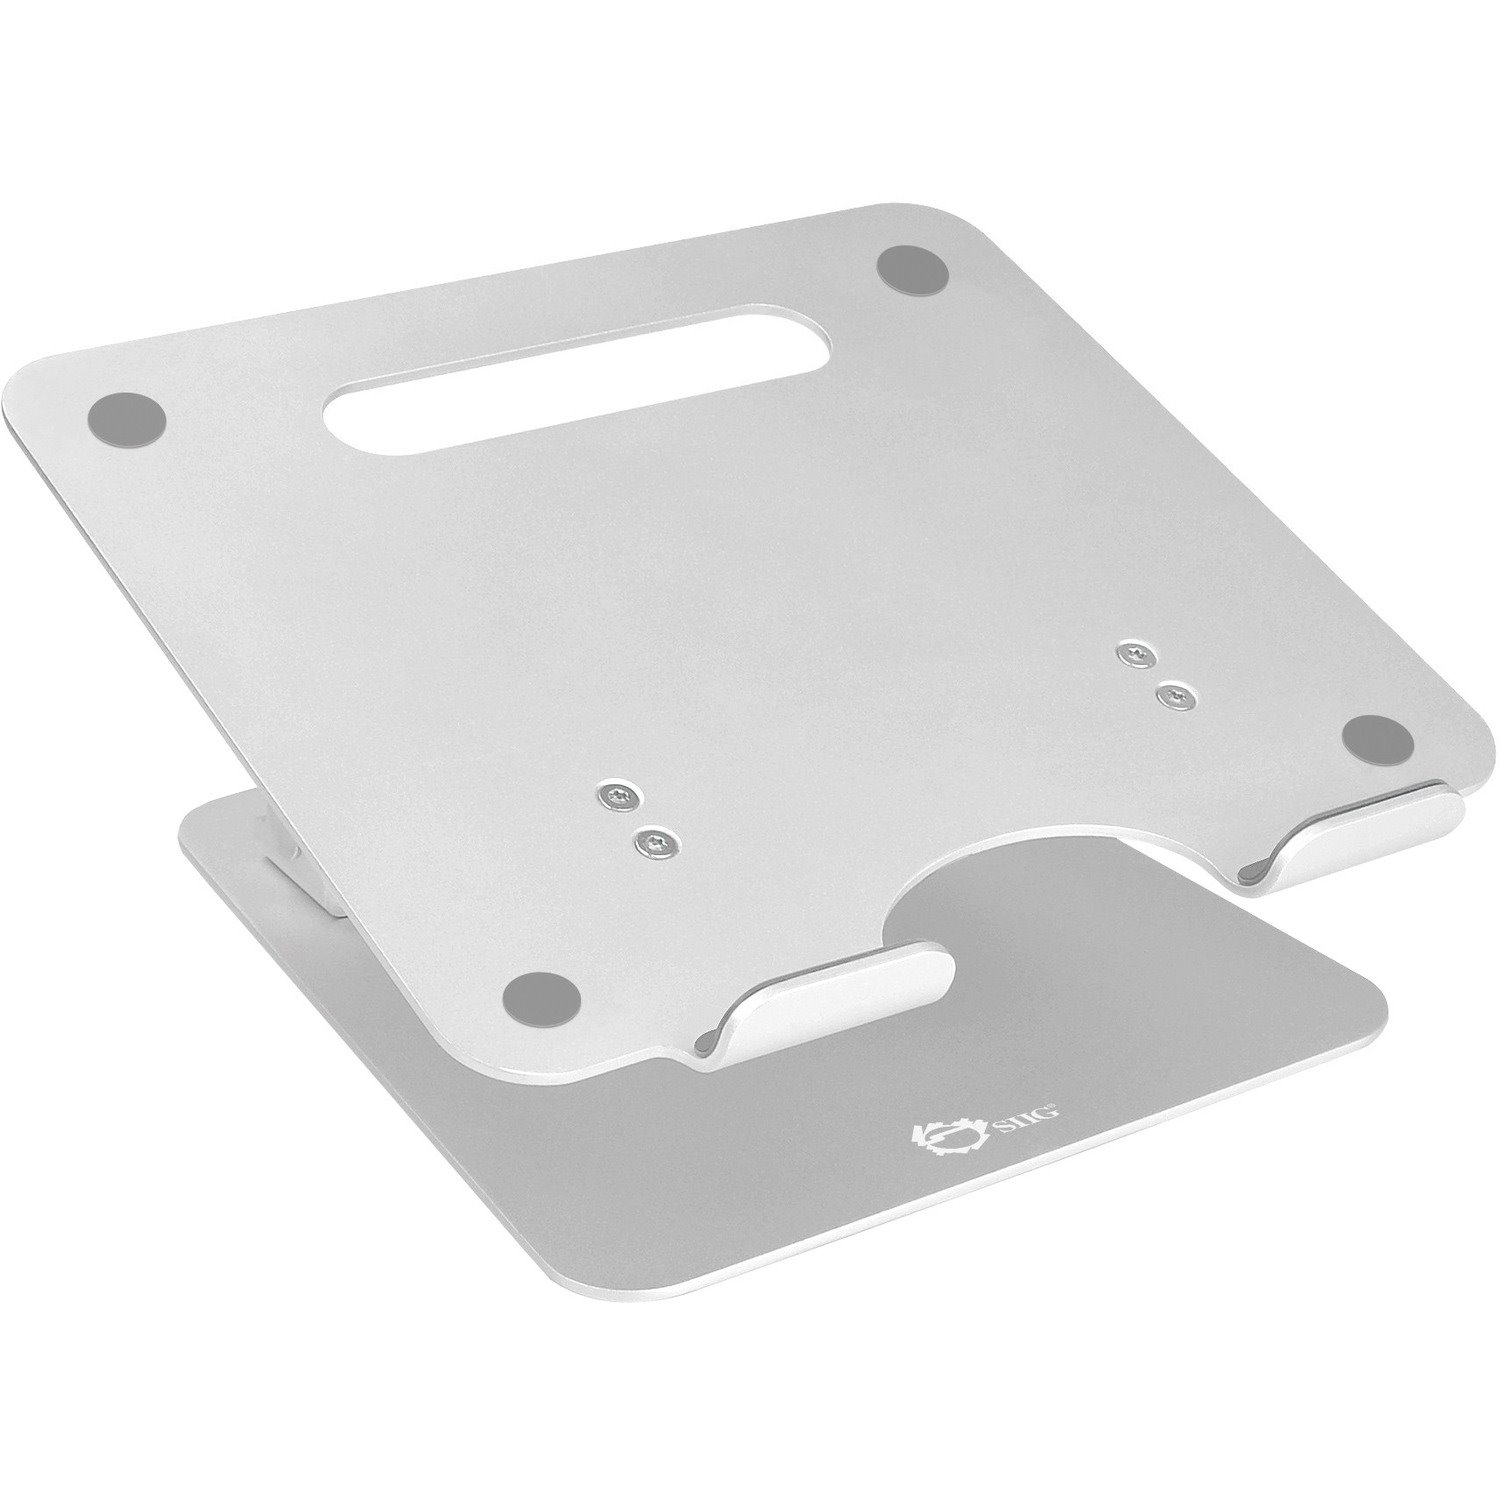 SIIG Adjustable Aluminum Laptop Stand for Macbook and PC